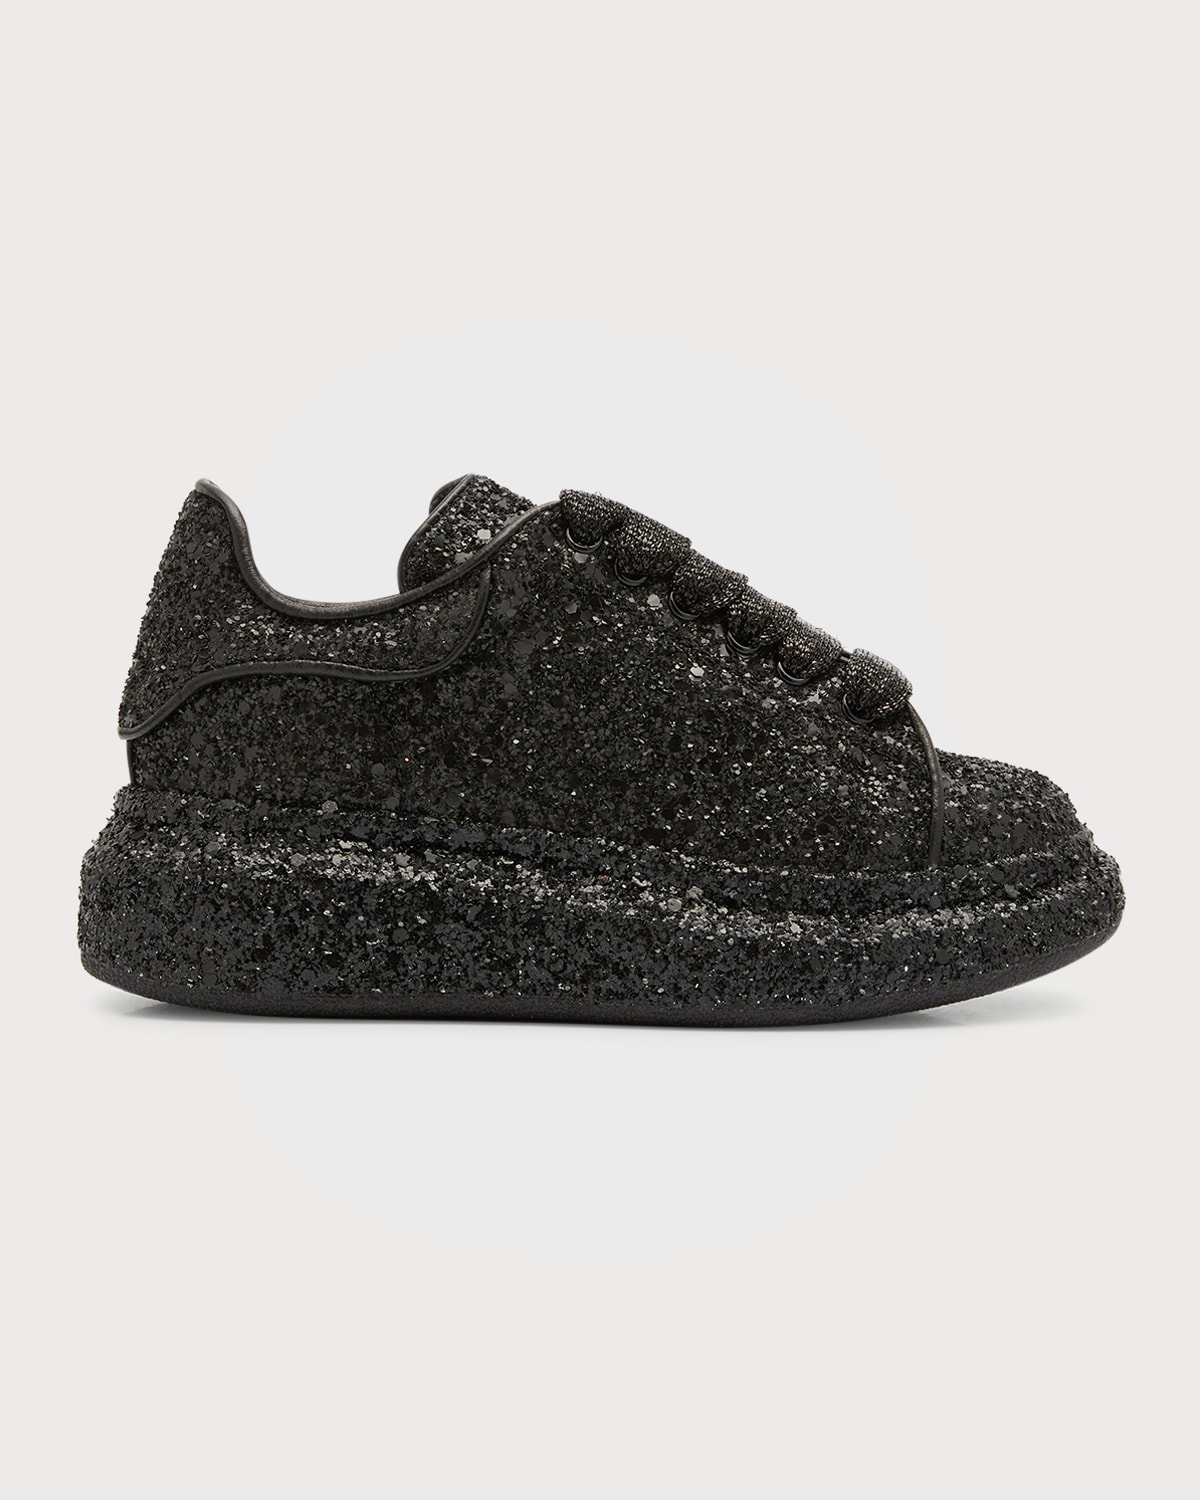 Kid's Oversized Glitter Sneakers, Toddlers/Kids